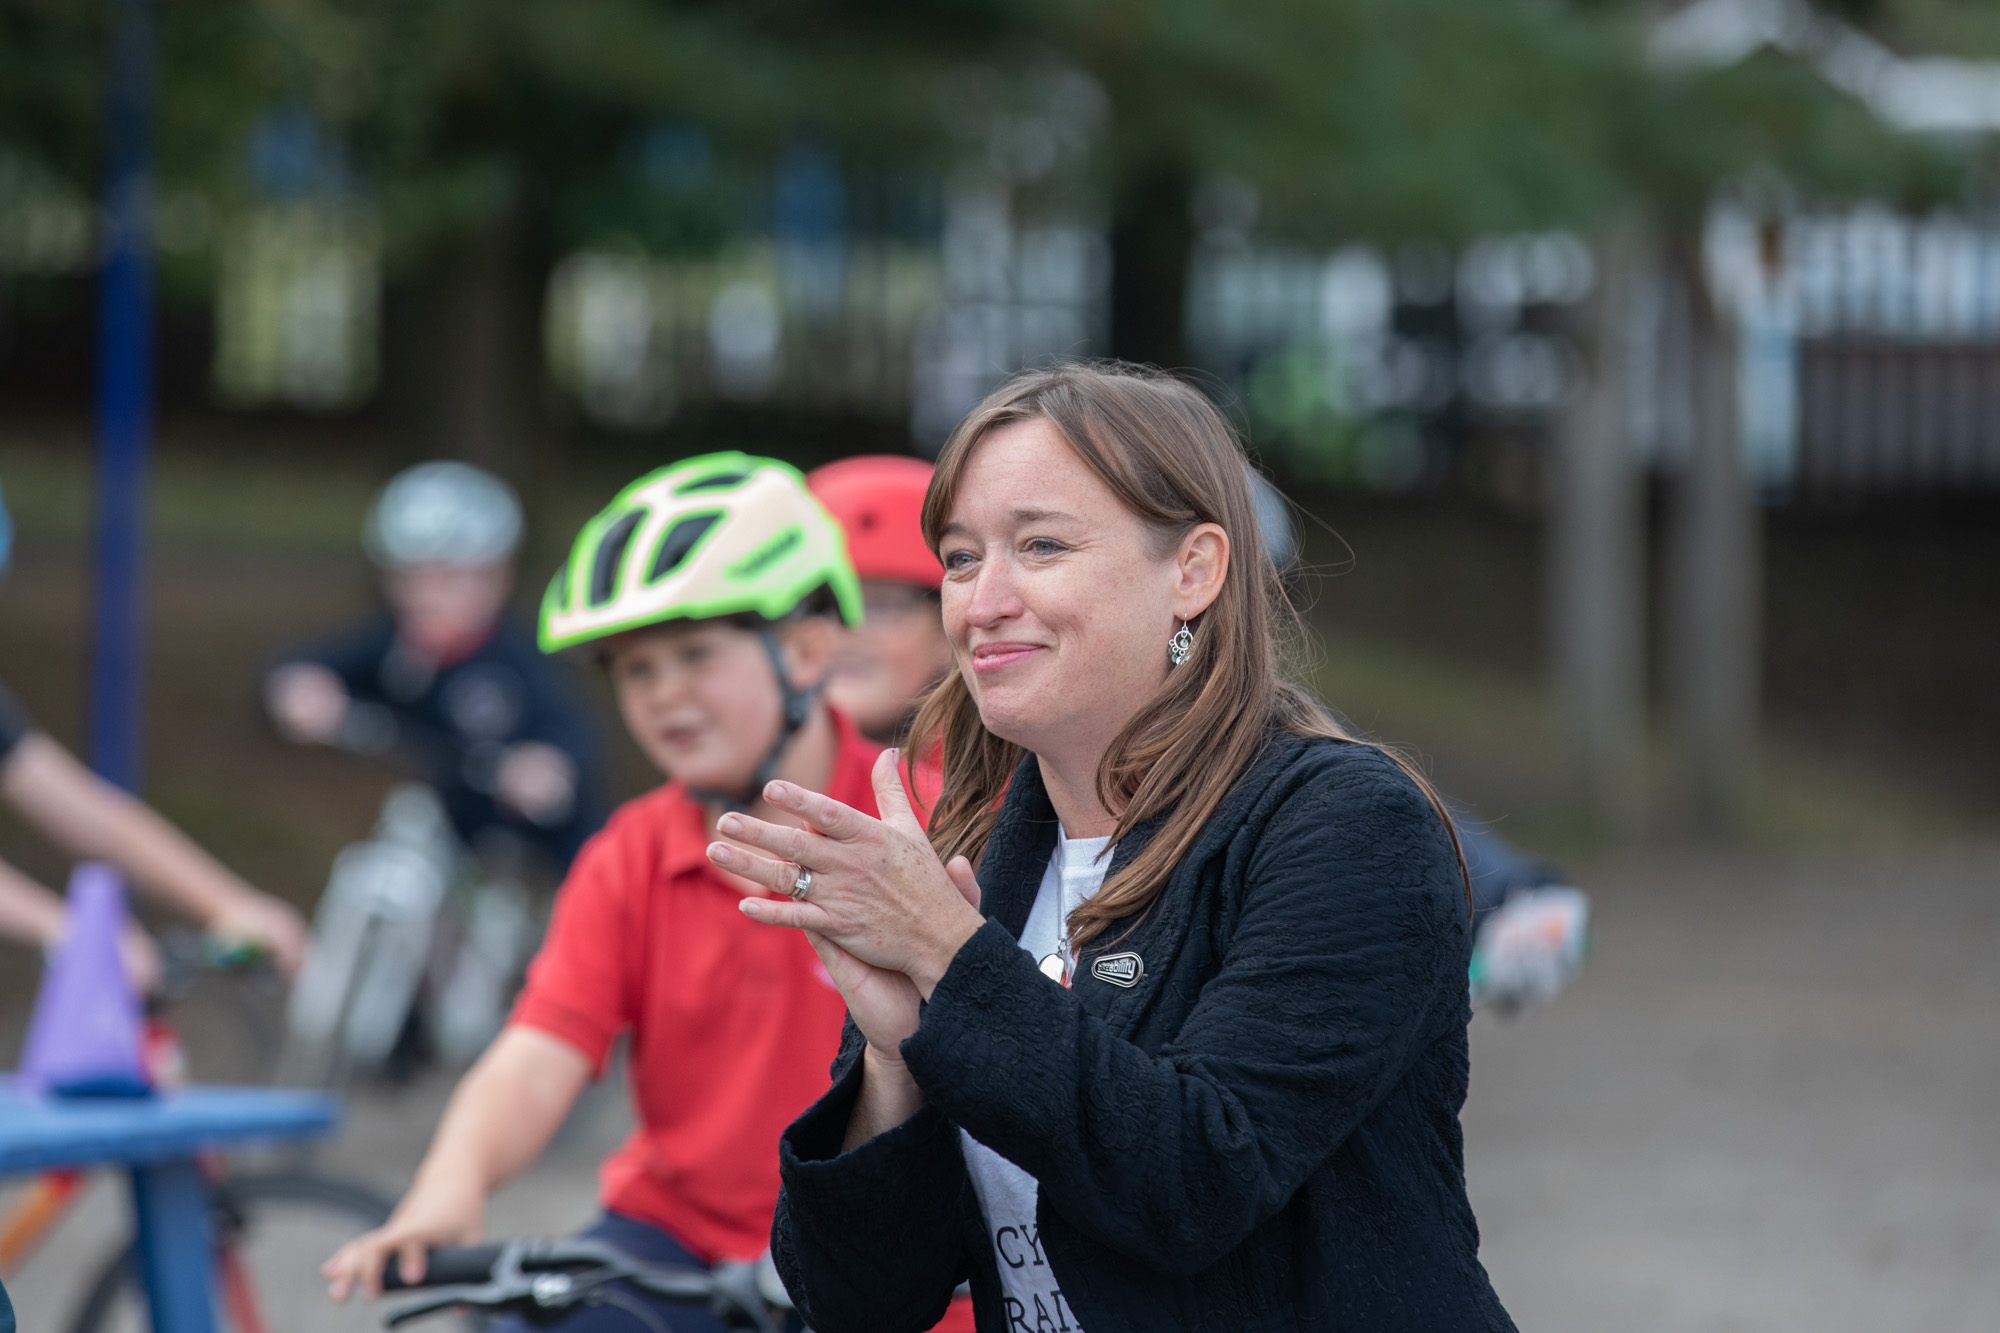 Emily Cherry applauding cyclists in playground